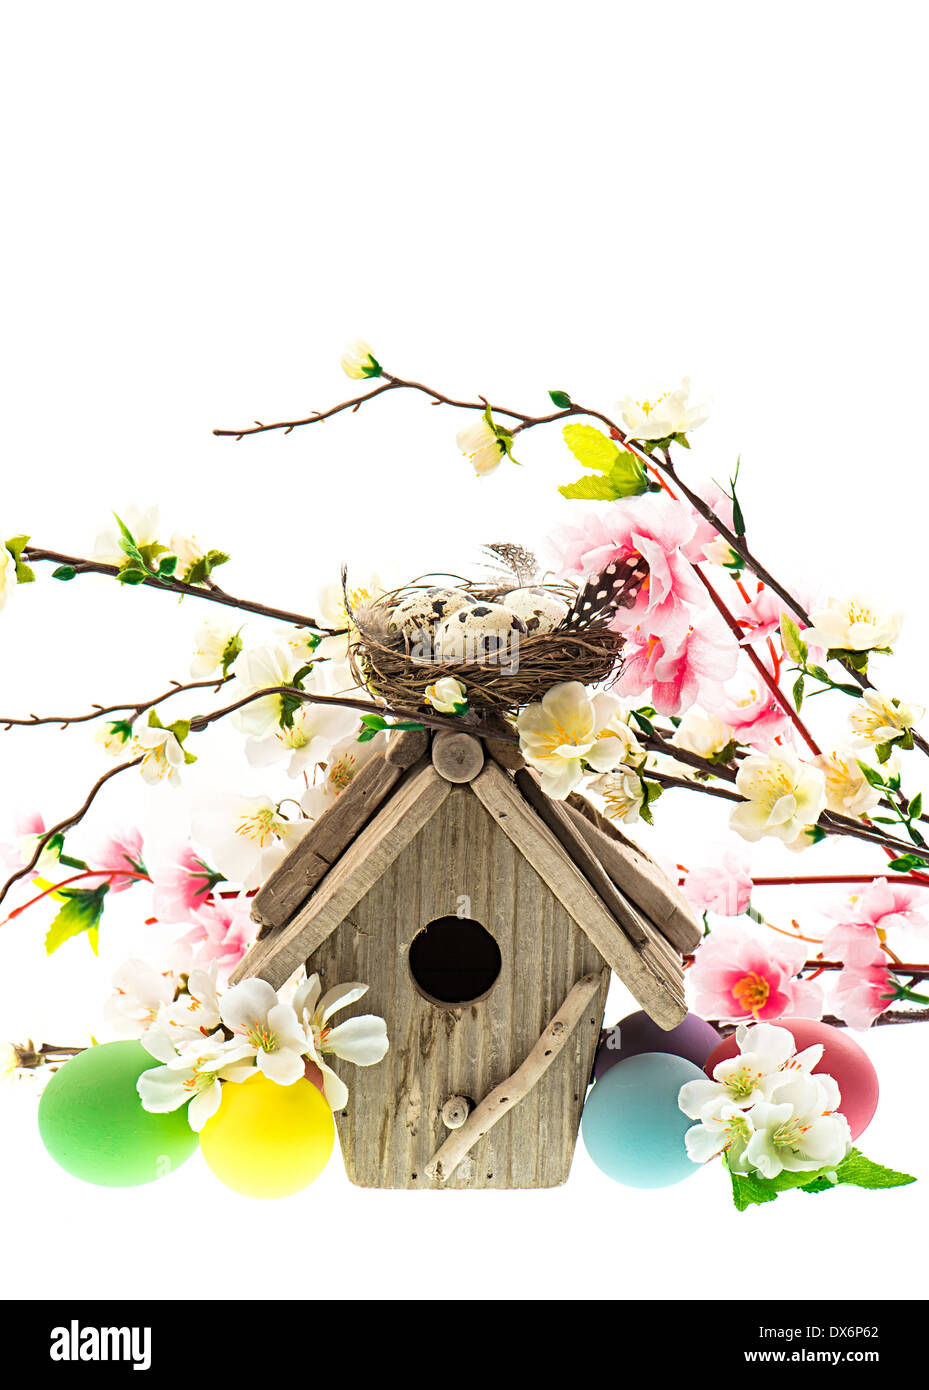 colorful easter decoration with birdhouse and eggs. spring apple and cherry blossoming Stock Photo